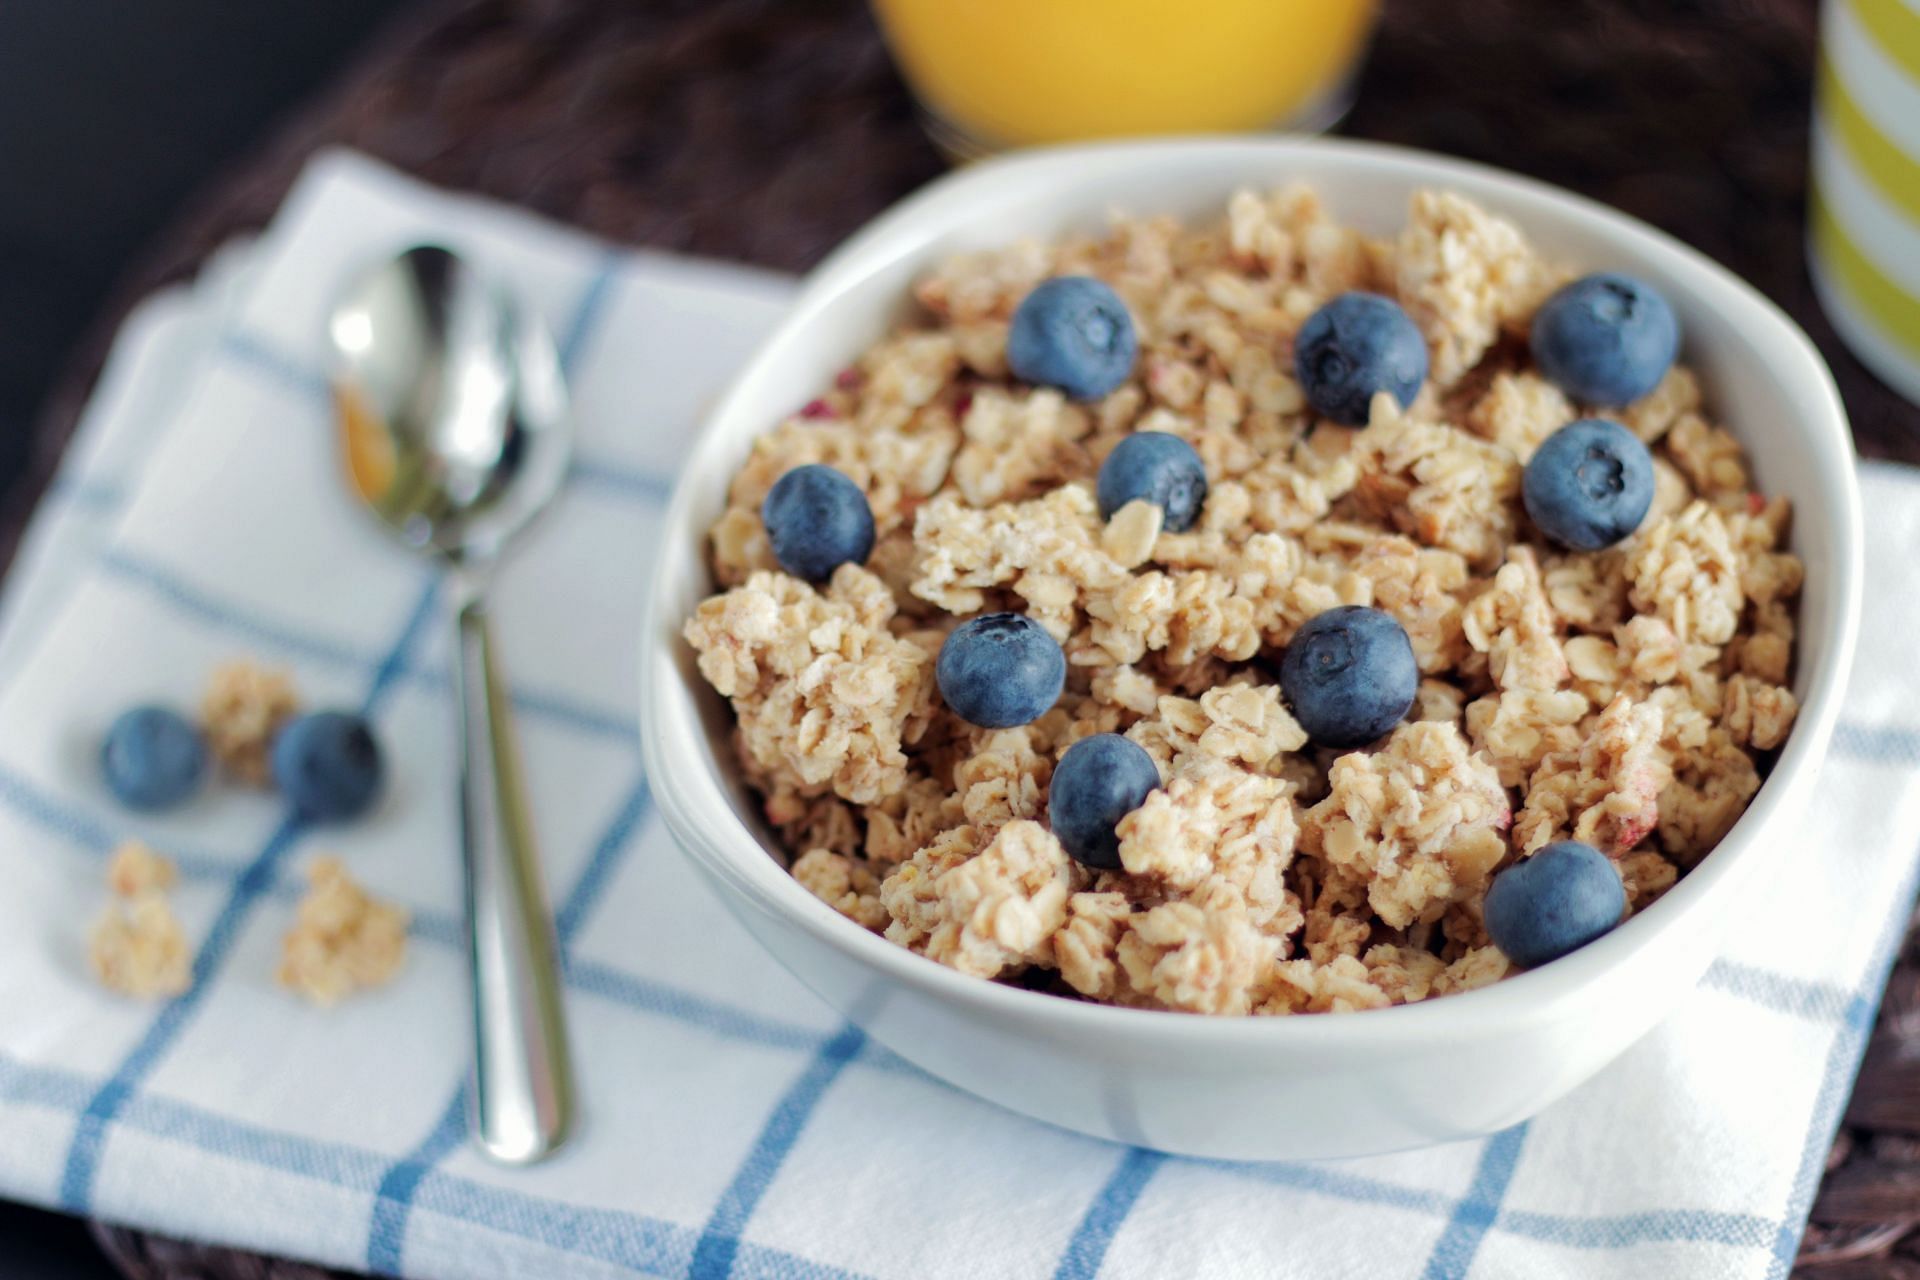 Benefits of oatmeal dysphagia diet (image sourced via Pexels / Photo by Jeshoots)